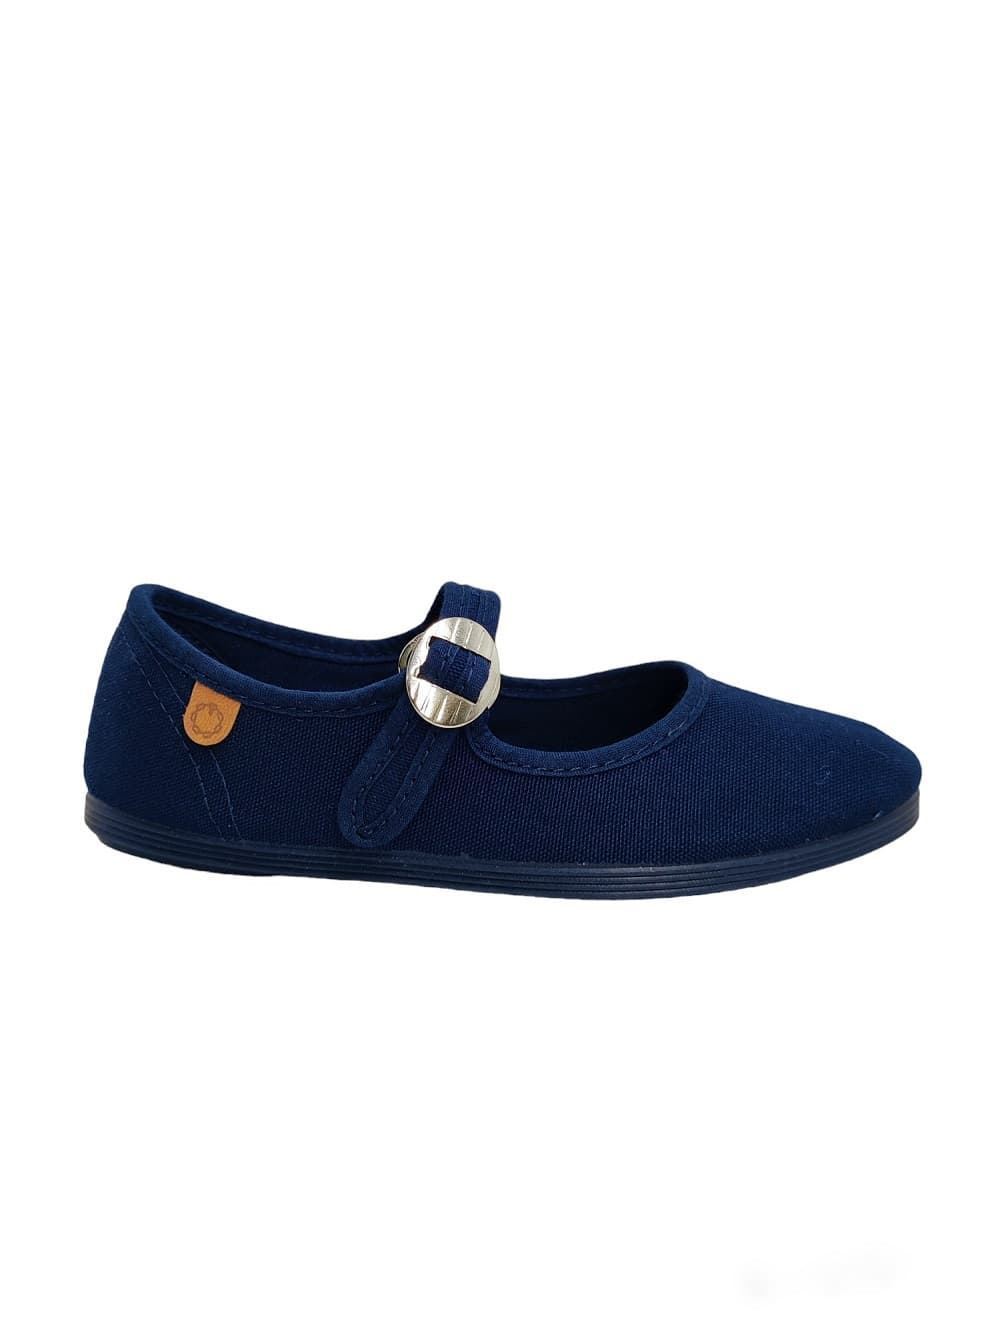 The Merceditas Chain for girls Navy Blue Canvas - Image 5